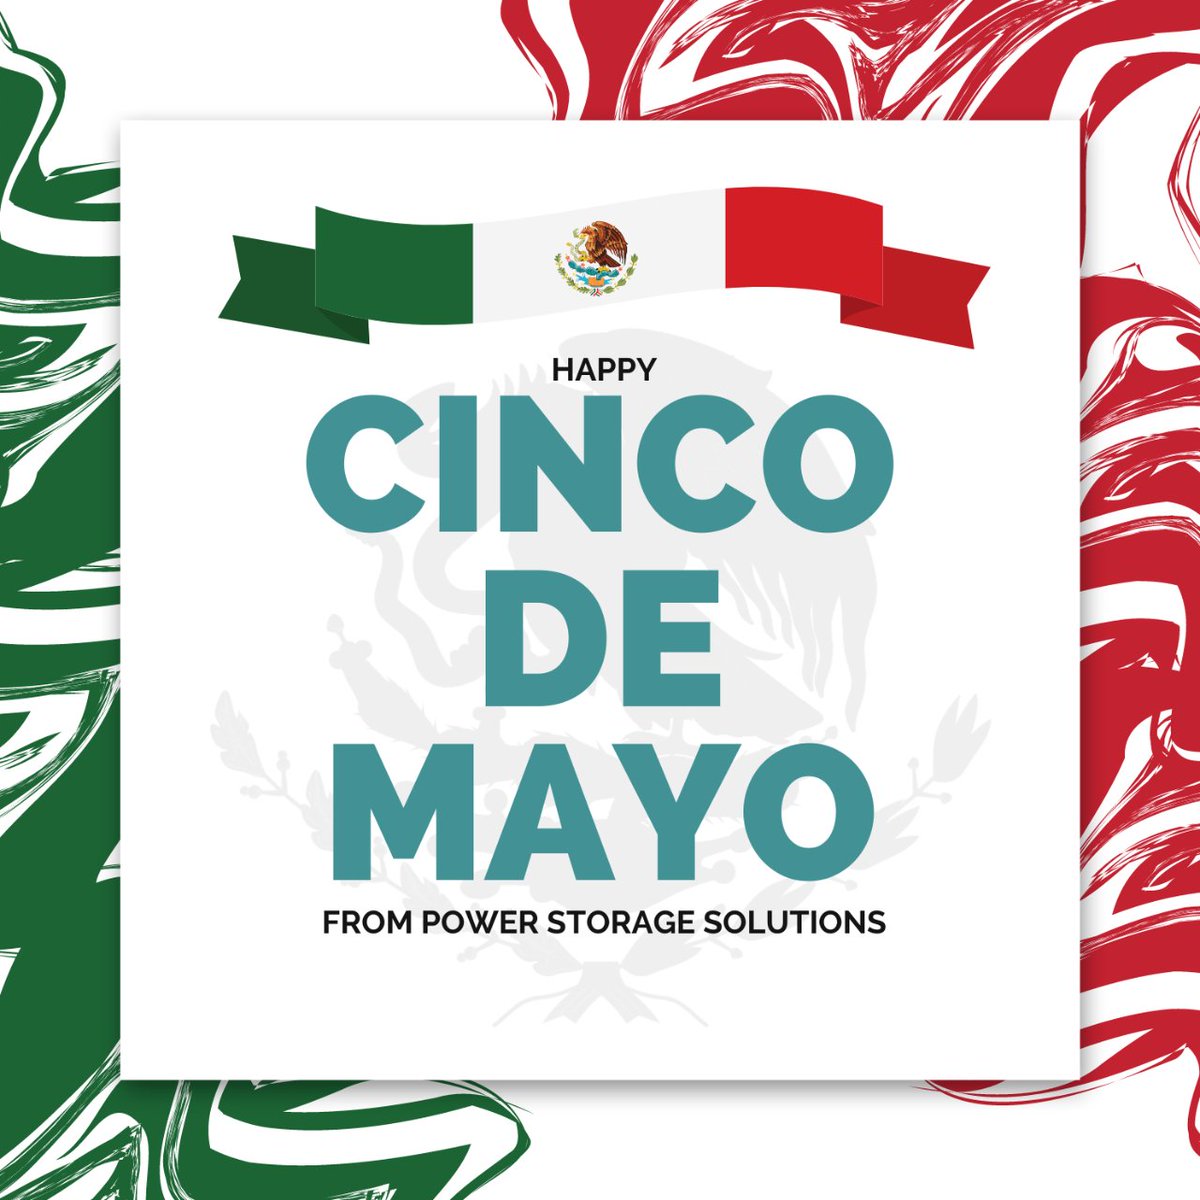 ¡Feliz Cinco de Mayo! To all our Mexican colleagues and customers, Power Storage Solutions wishes you a happy Cinco de Mayo! May your holiday festivities be filled with music, dance, magic and celebration. ¡Salud! #CincoDeMayo #PowerStorageSolutions #PWRSS #PowerStorage